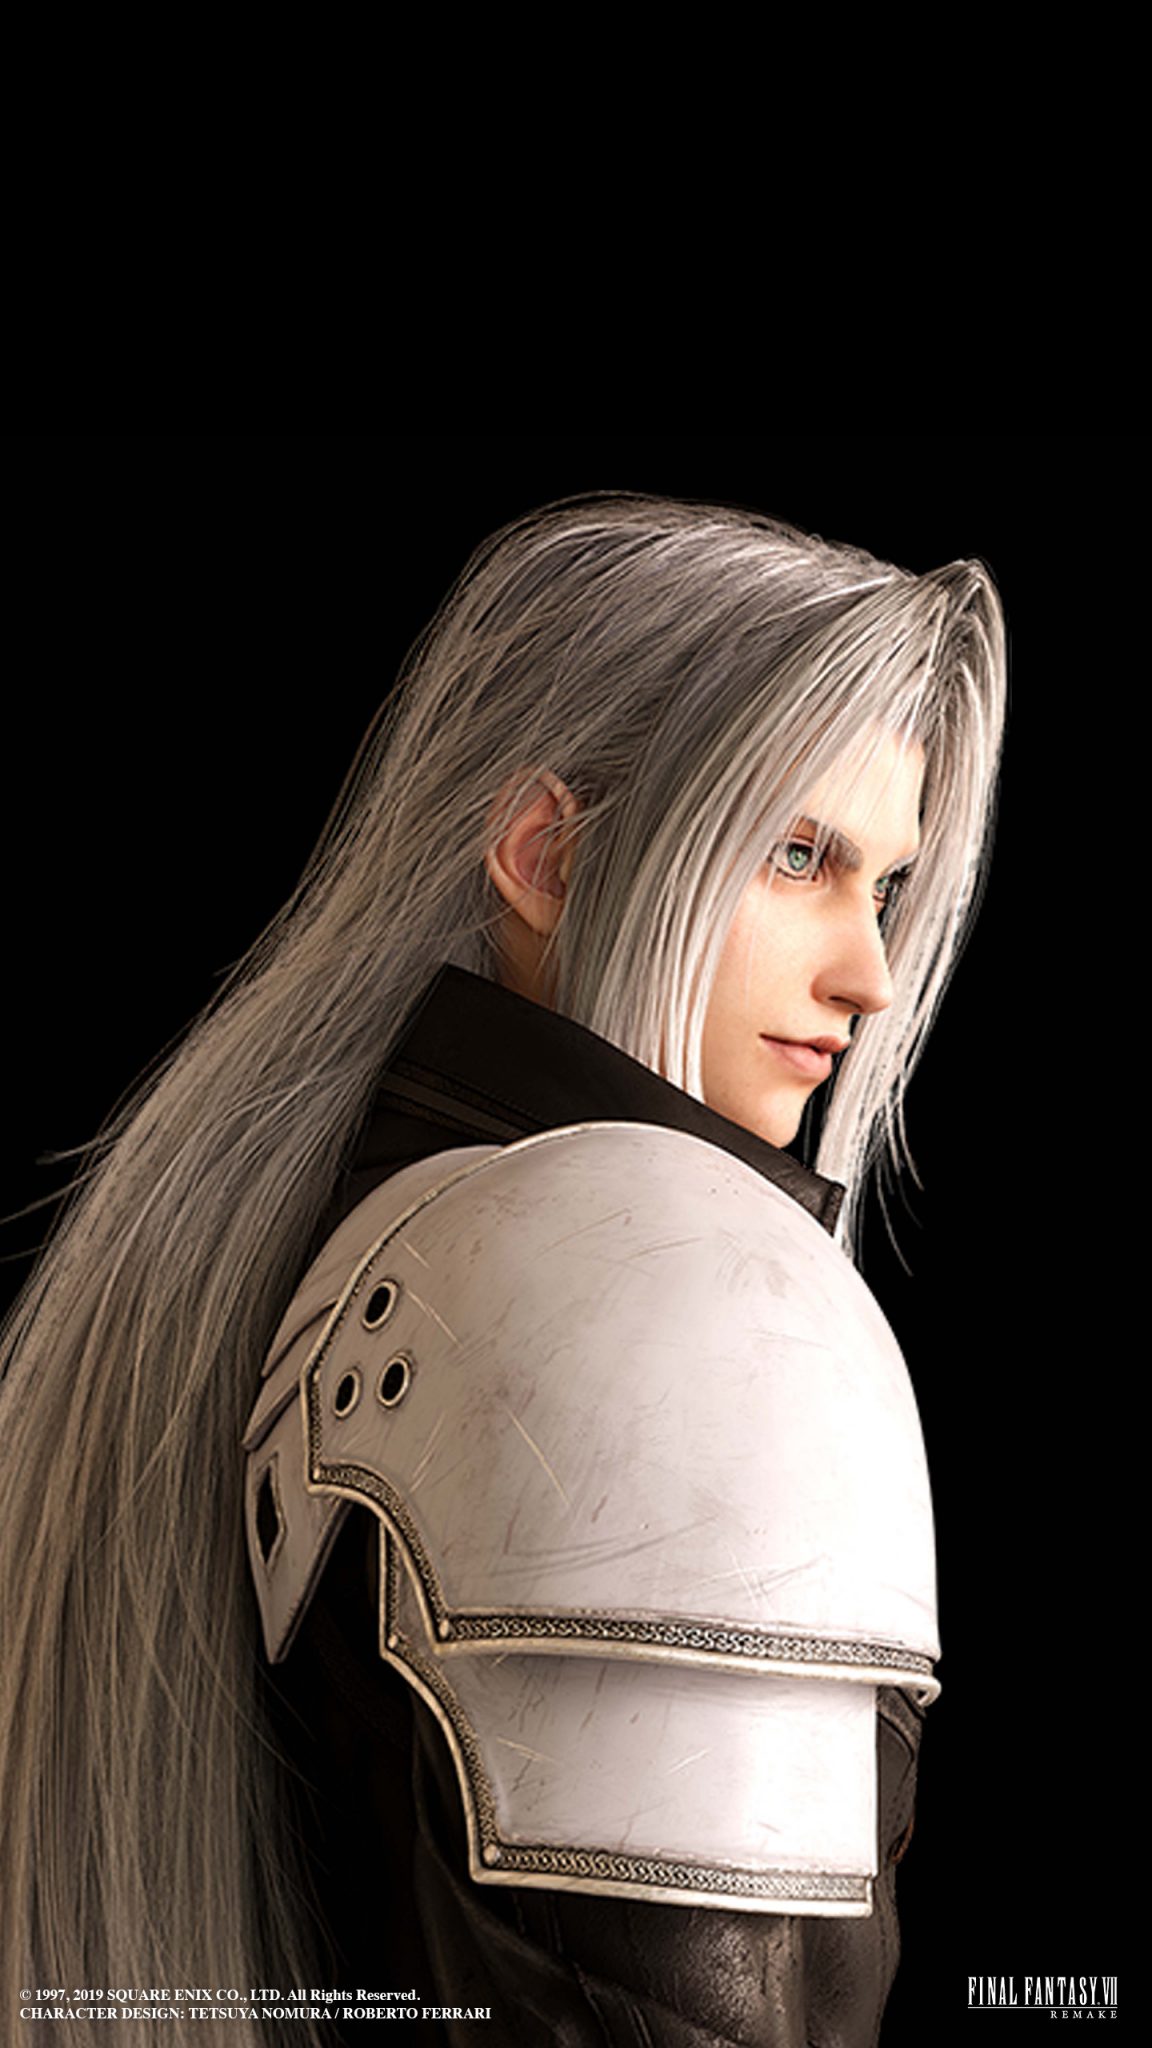 Final Fantasy VII Remake Sephiroth Wallpaper | Cat with Monocle